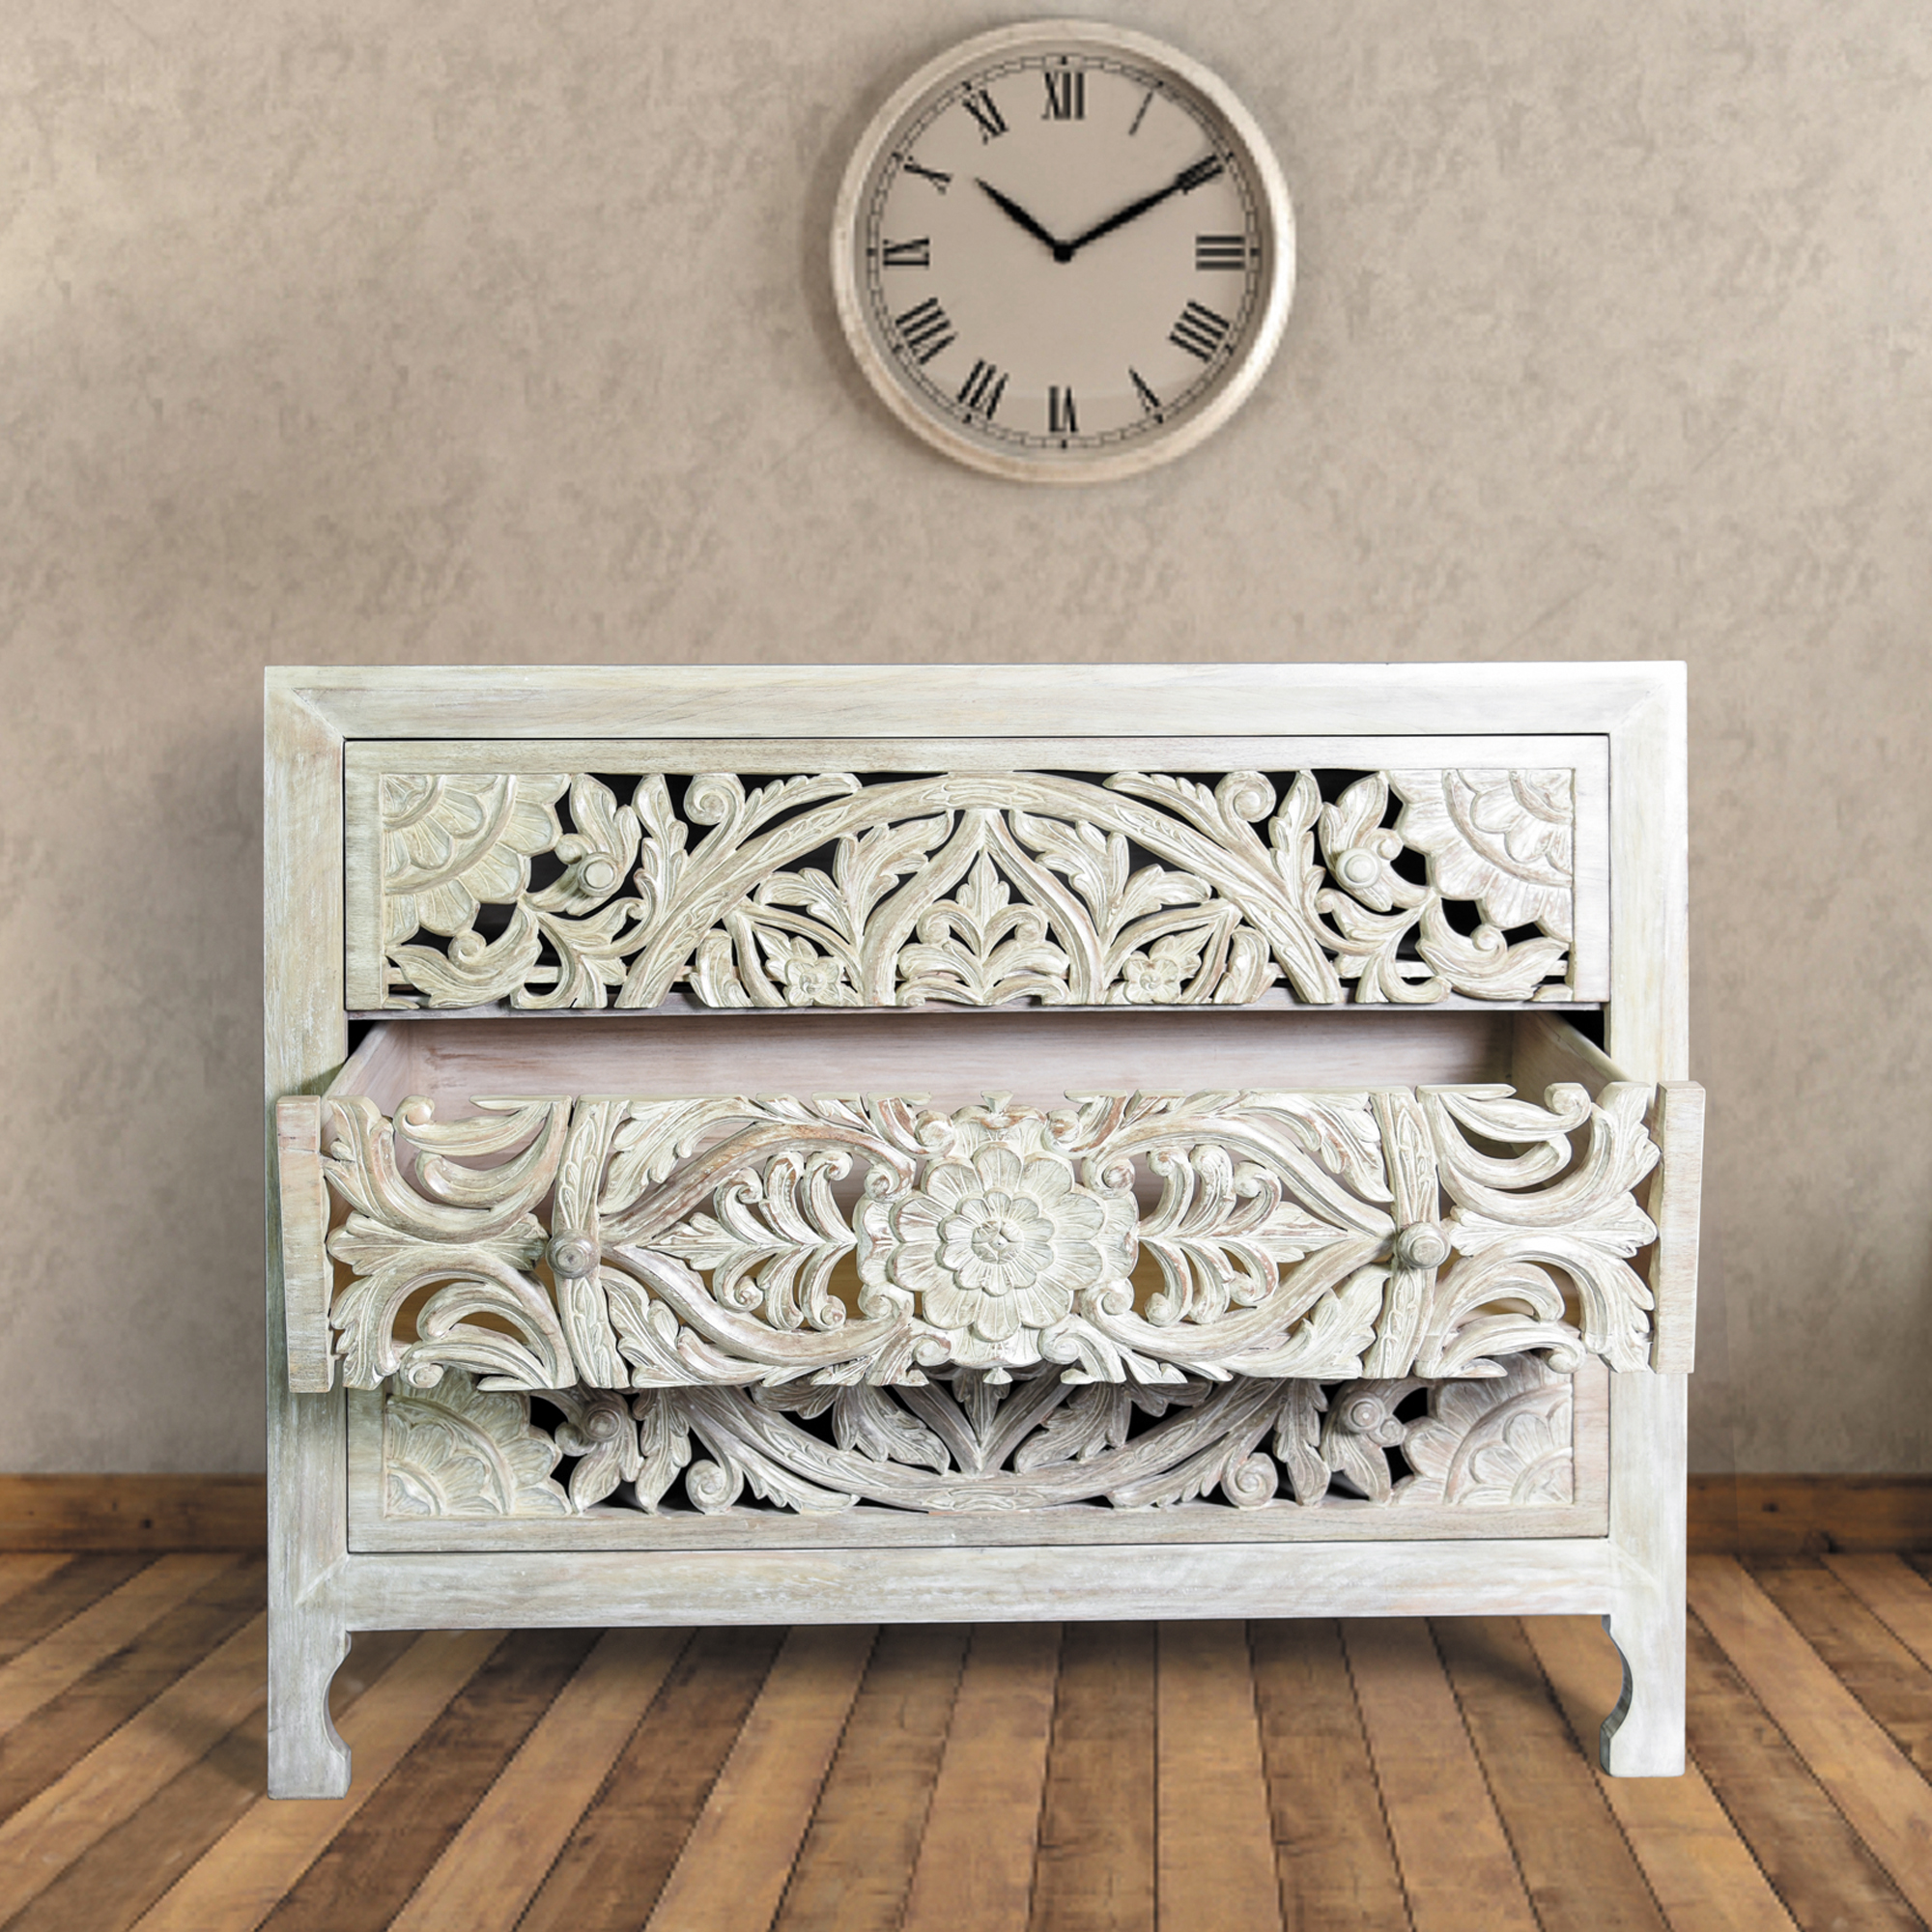 Anthro chest of drawers<abbr> Ghitorni, New Delhi<br>Western hemlock side table with carved floral patterns</abbr>